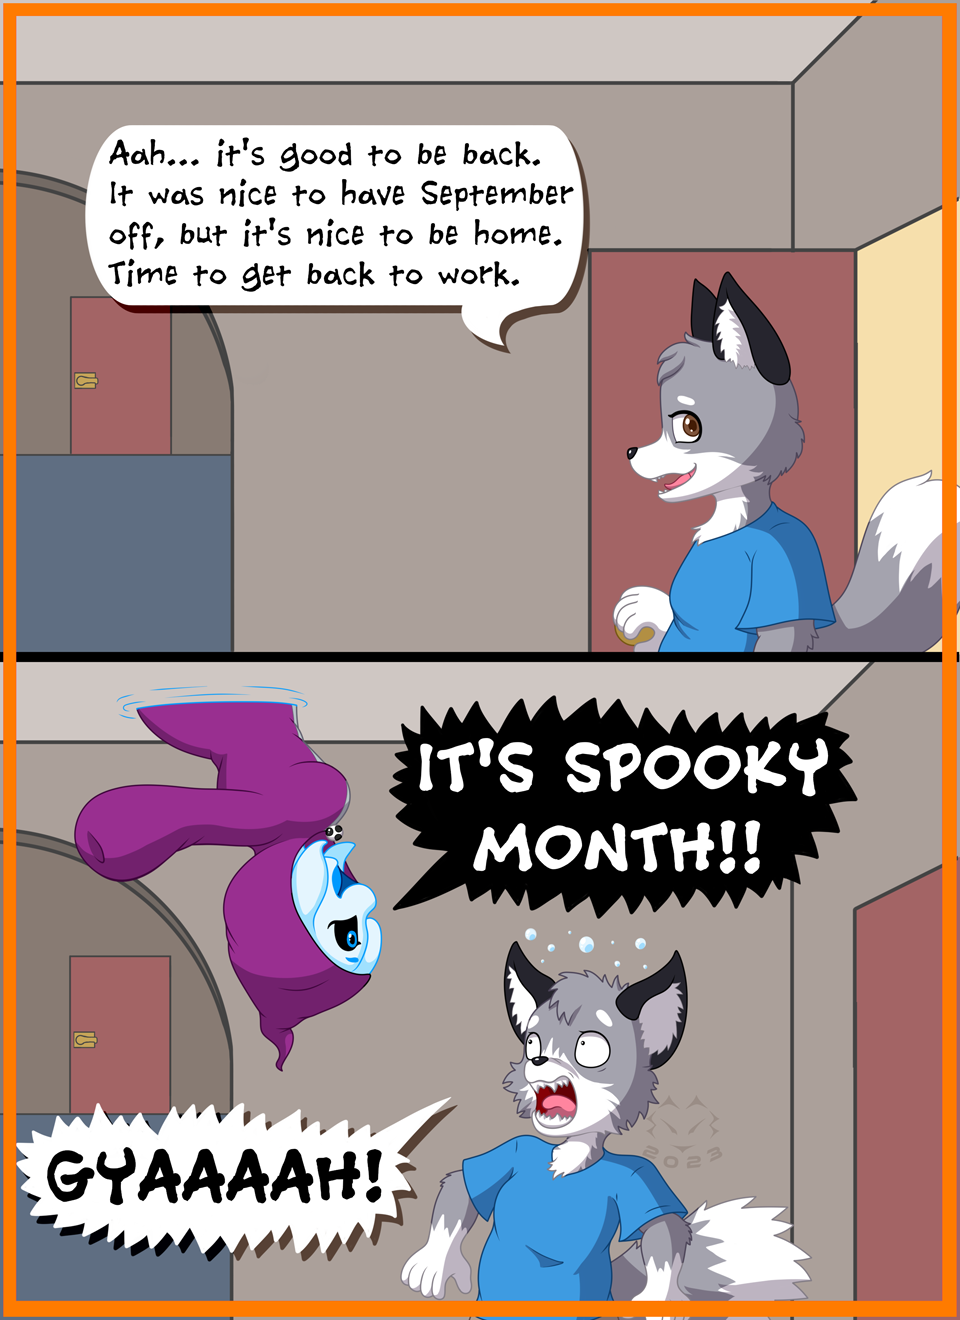 Almost Got Them (Spooky Month Comic) by Alexaisbeautiful2021 on